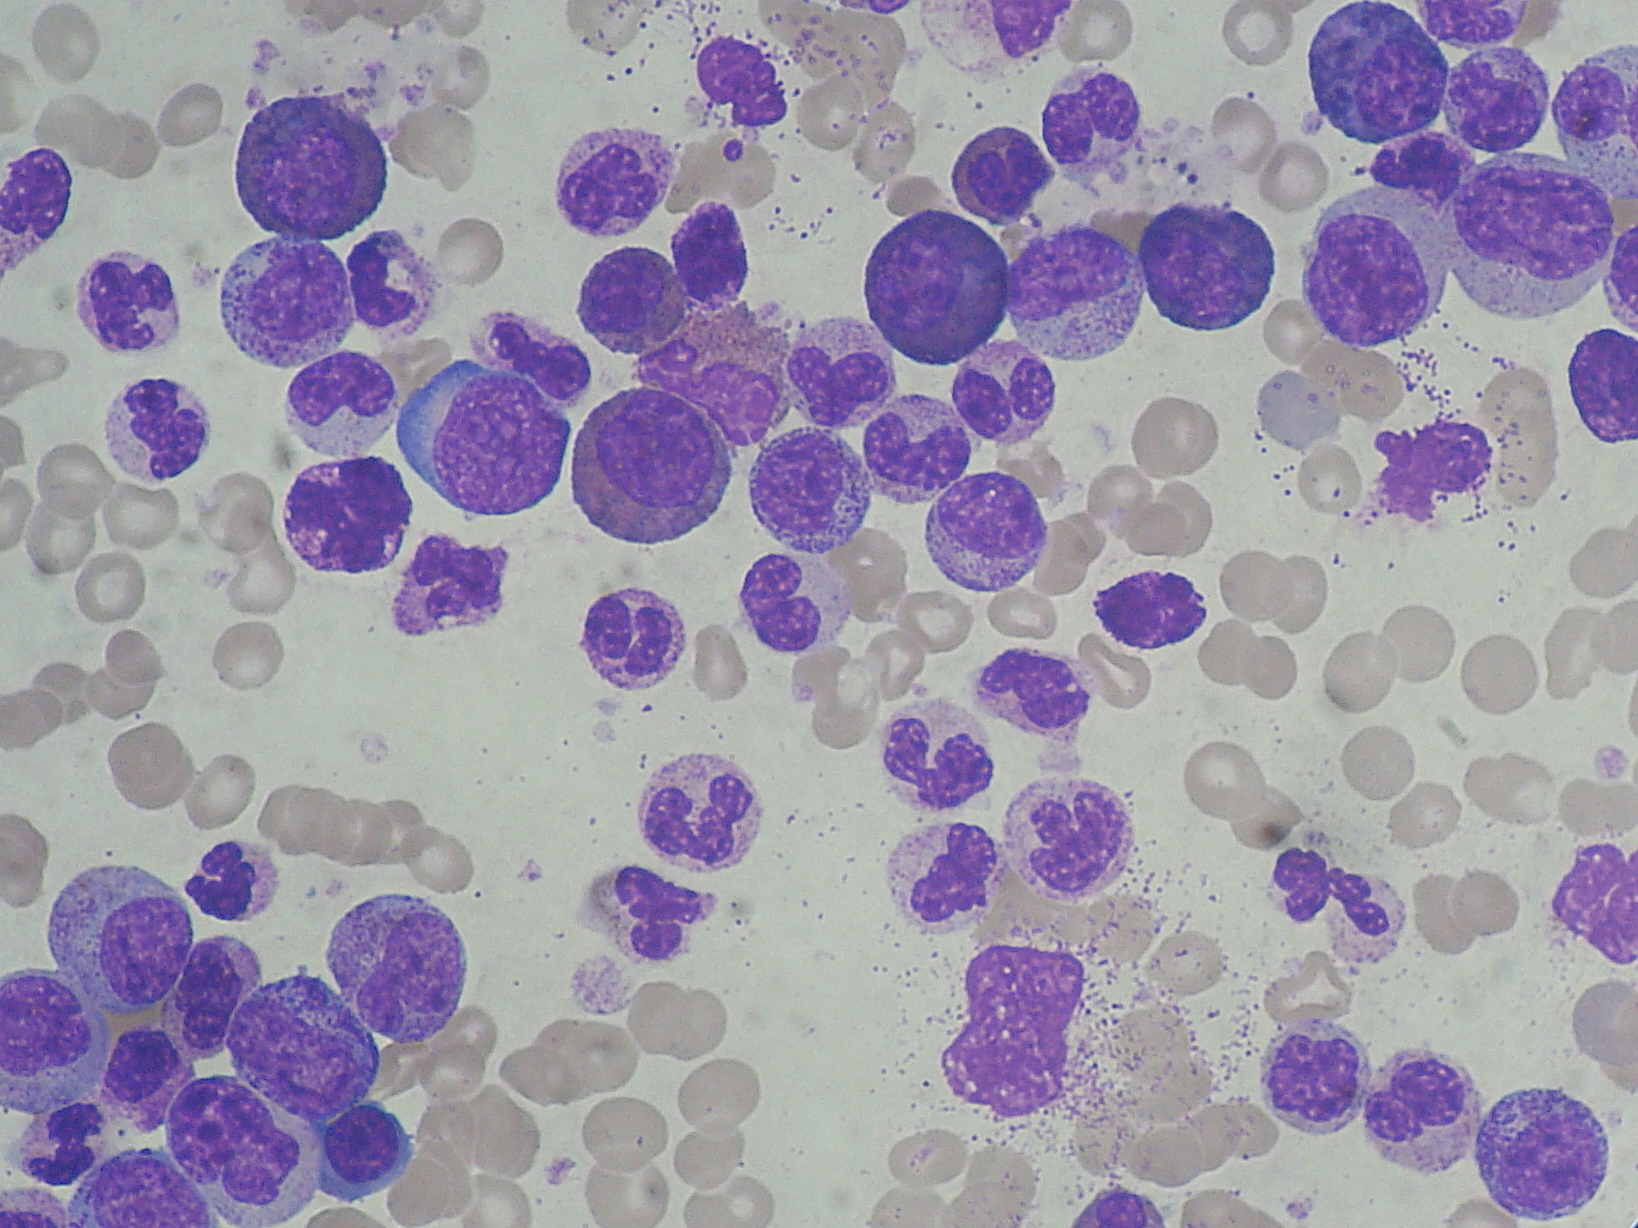 Blood from CML patient with higher number of granulocytes (dyed cells) by Paulo Henrique Orlandi Mourao